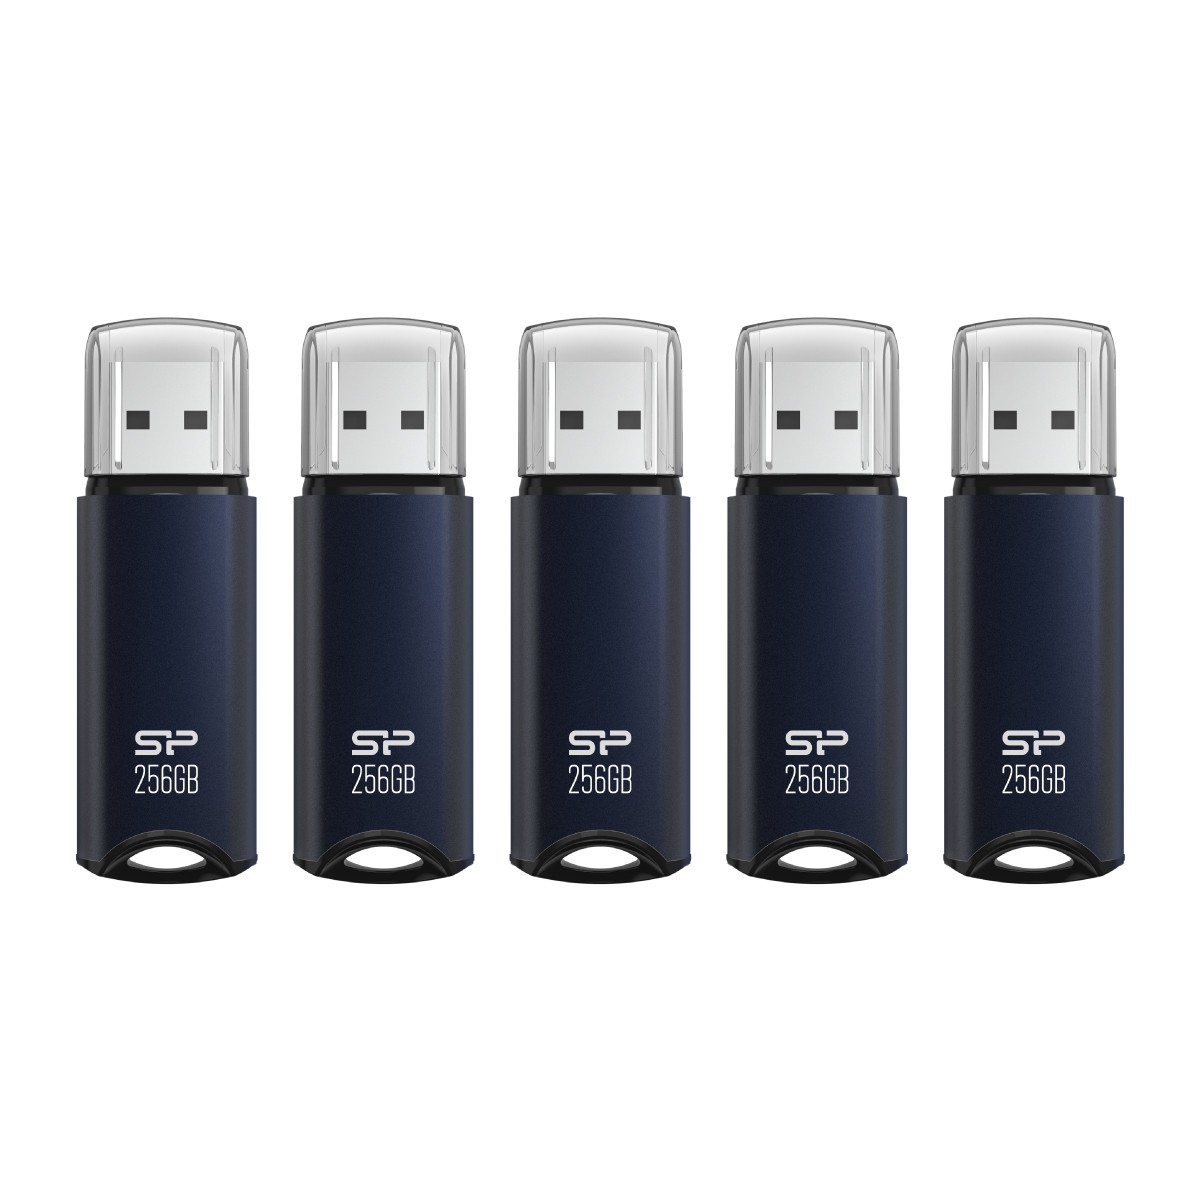 Silicon Power 256GB Marvel M02 USB 3.0 Flash Drive - Navy Blue (5-Pack)